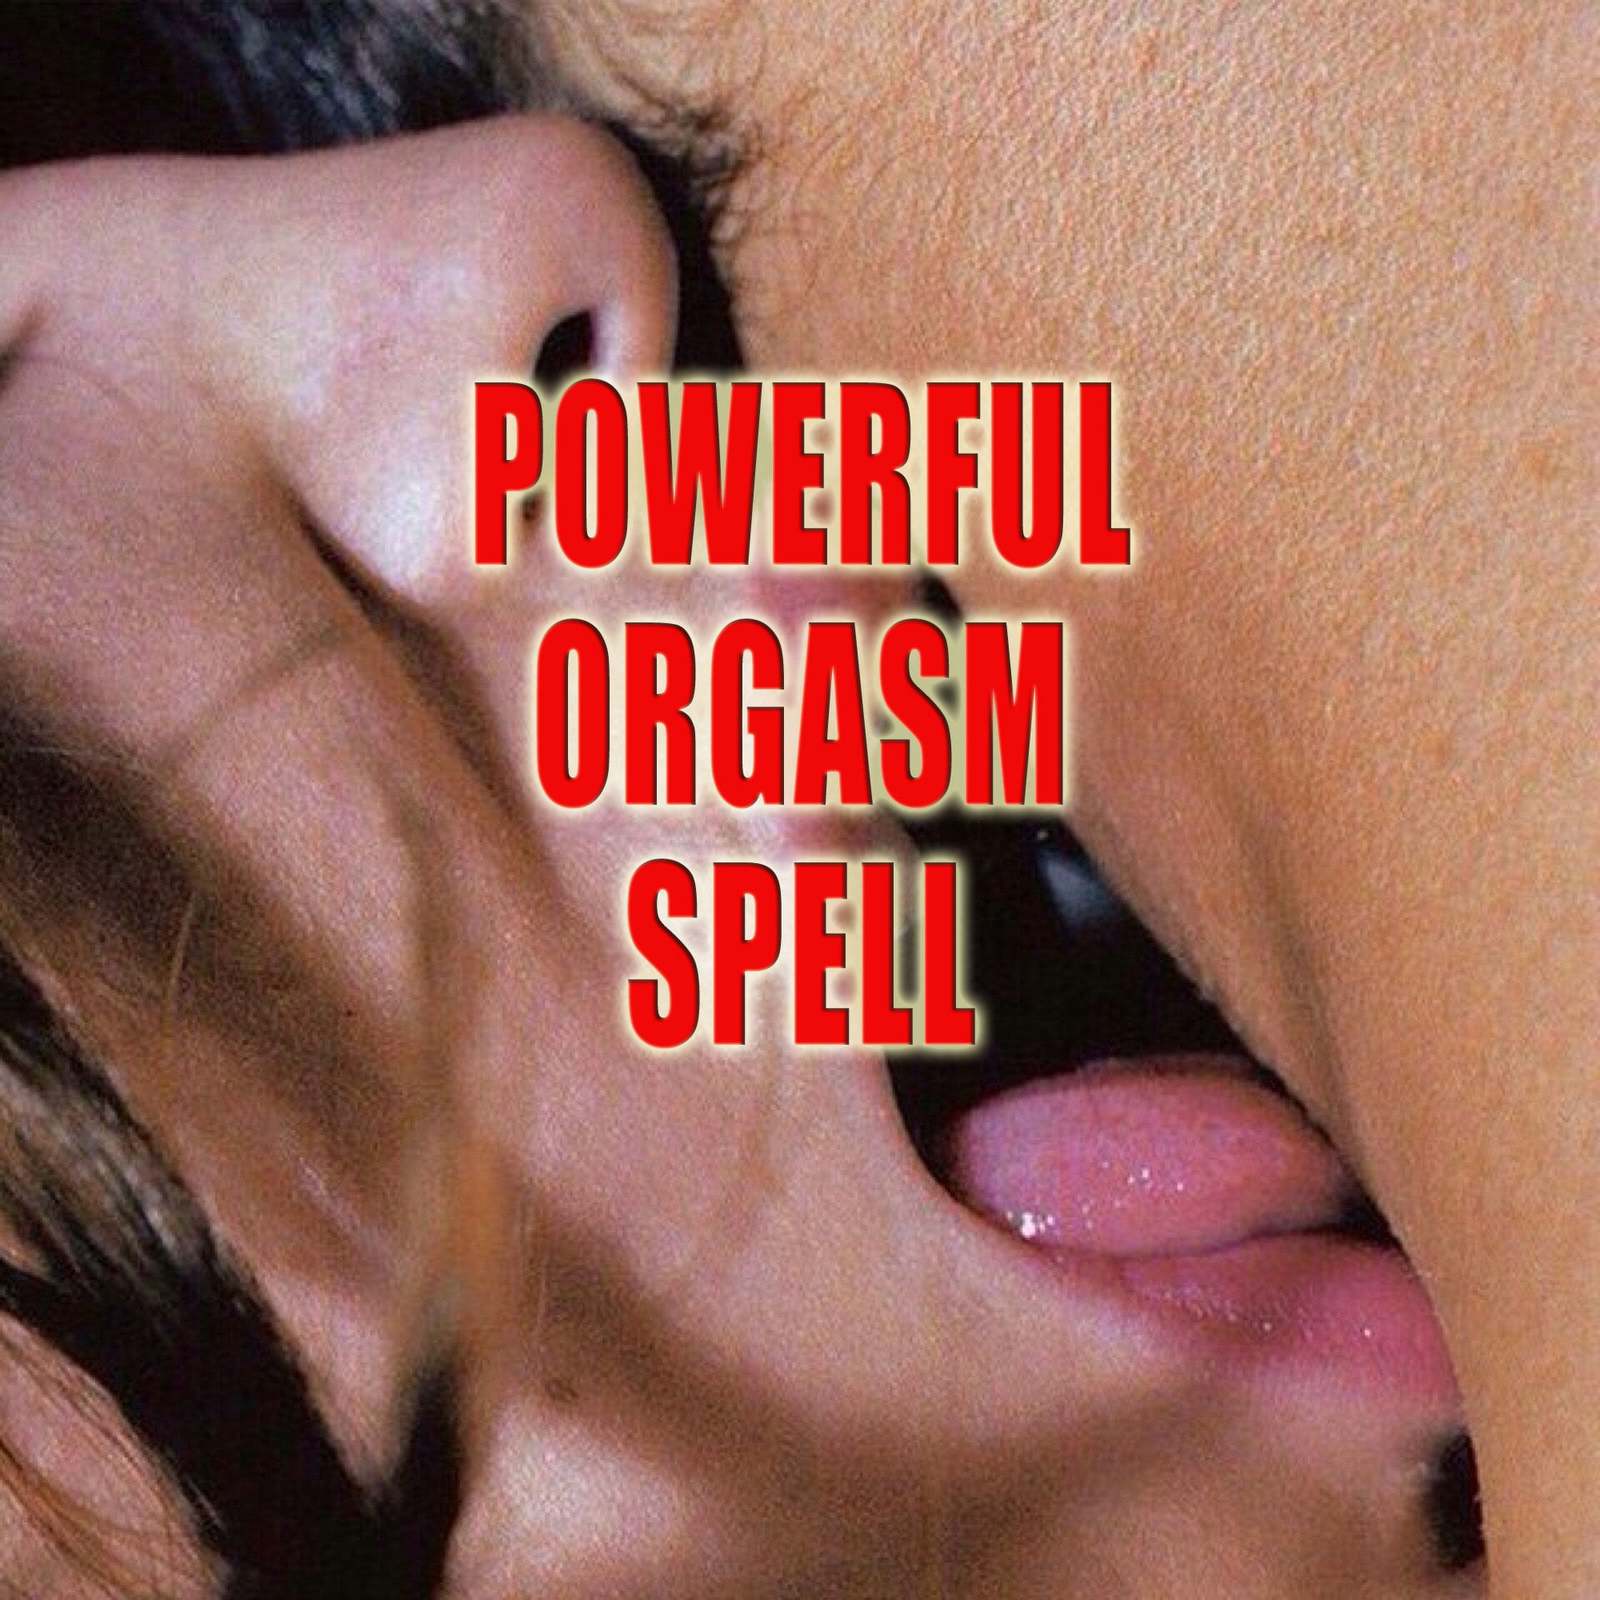 Powerful Orgasm Spell Like Never Before Only With You - Wishmaster777